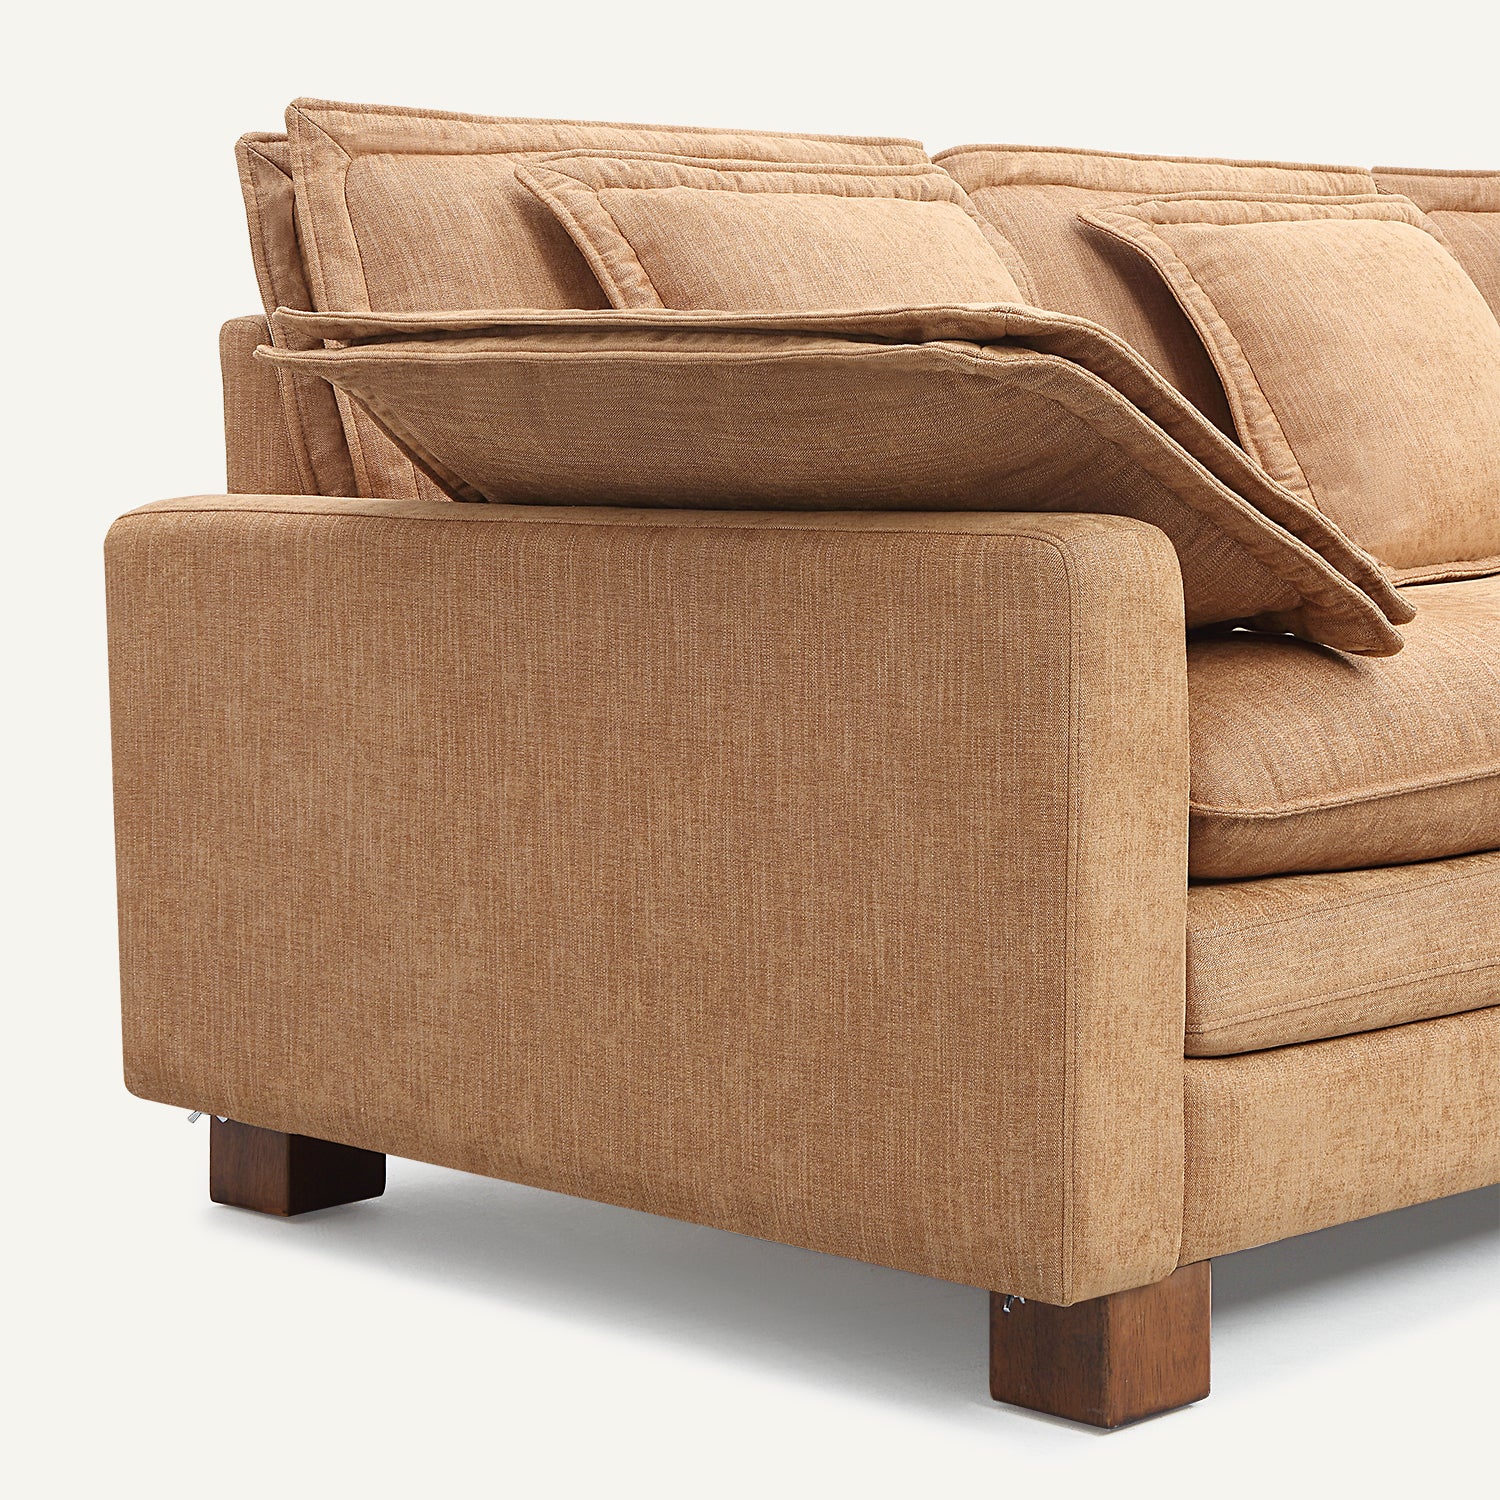 Stacked Tan Linen 3-Seat Sofa with Ottoman